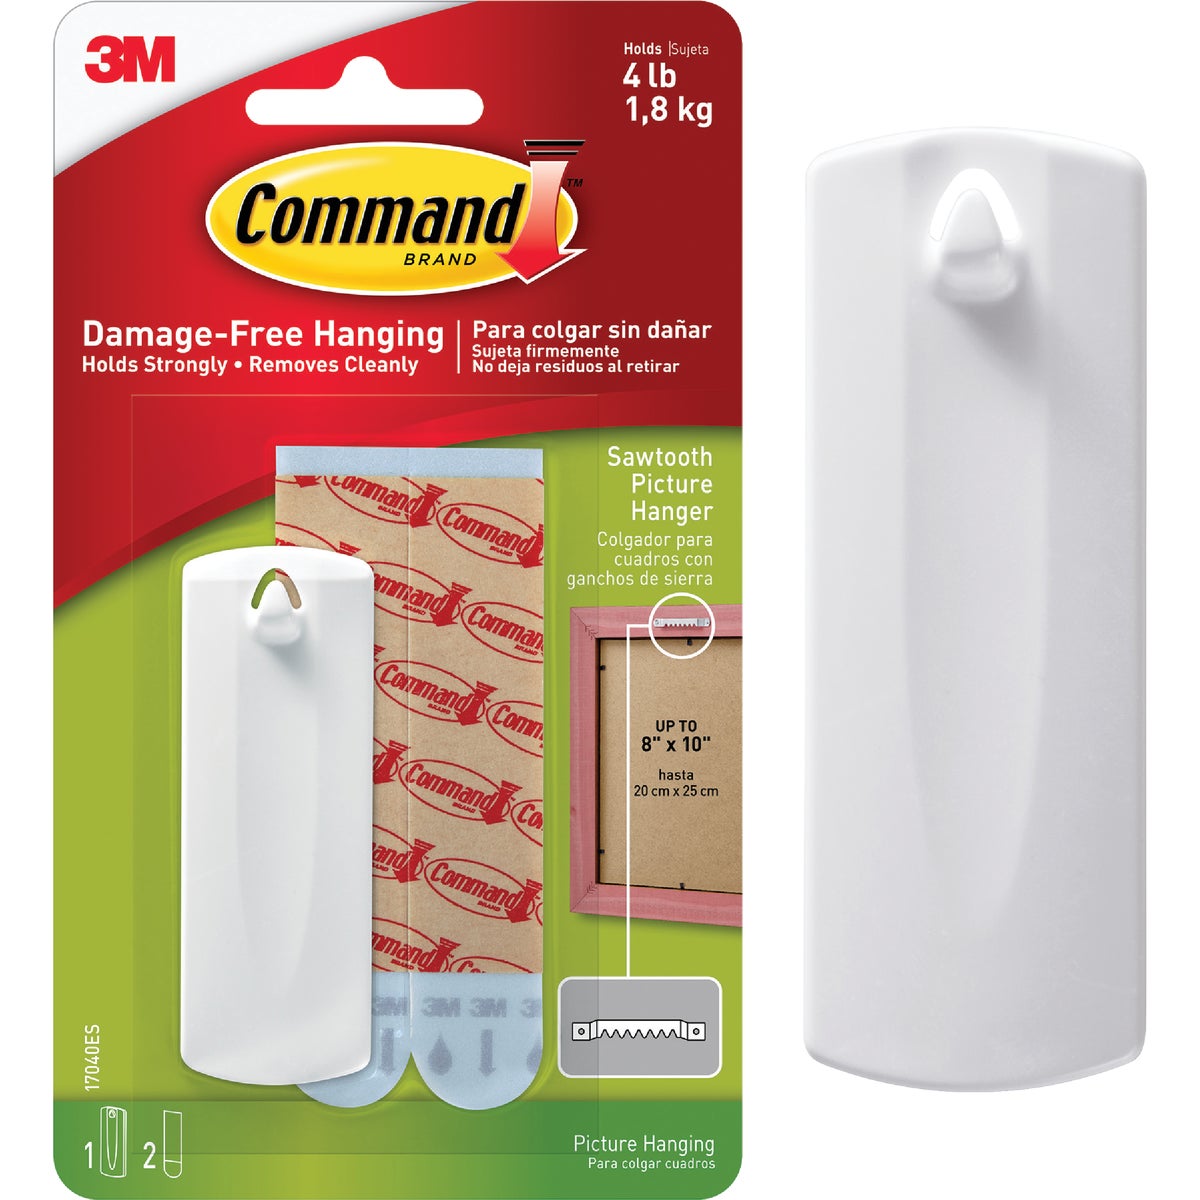 3M Command Sawtooth Adhesive Picture Hanger